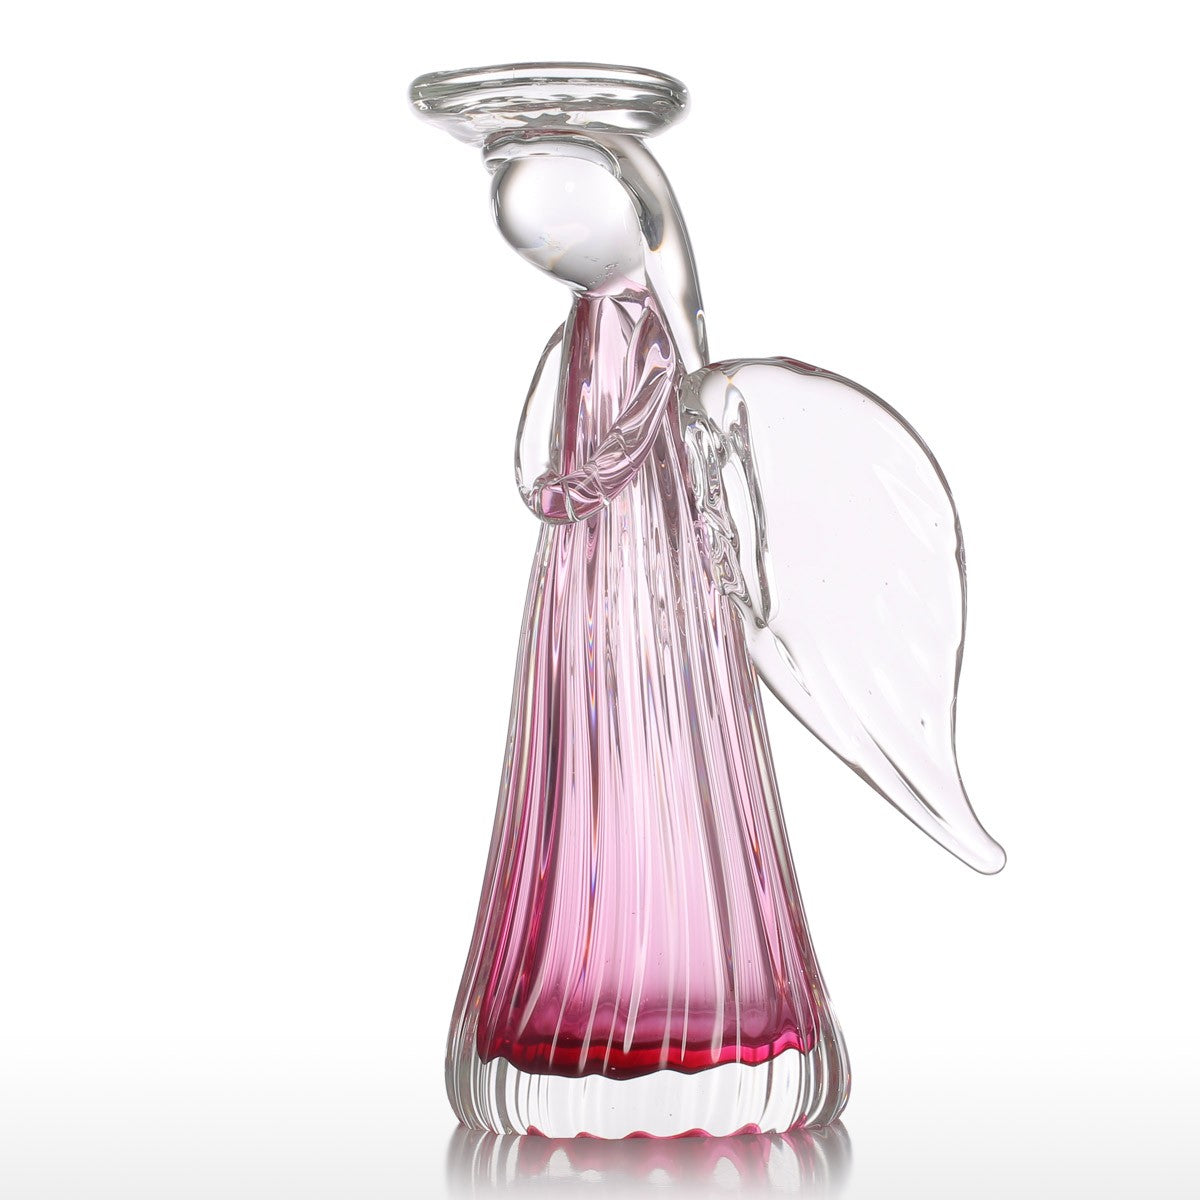 Glass Angel Ornament and Angel Decorations with Christmas Candles for Christmas Decorations inspired Merry Christmas